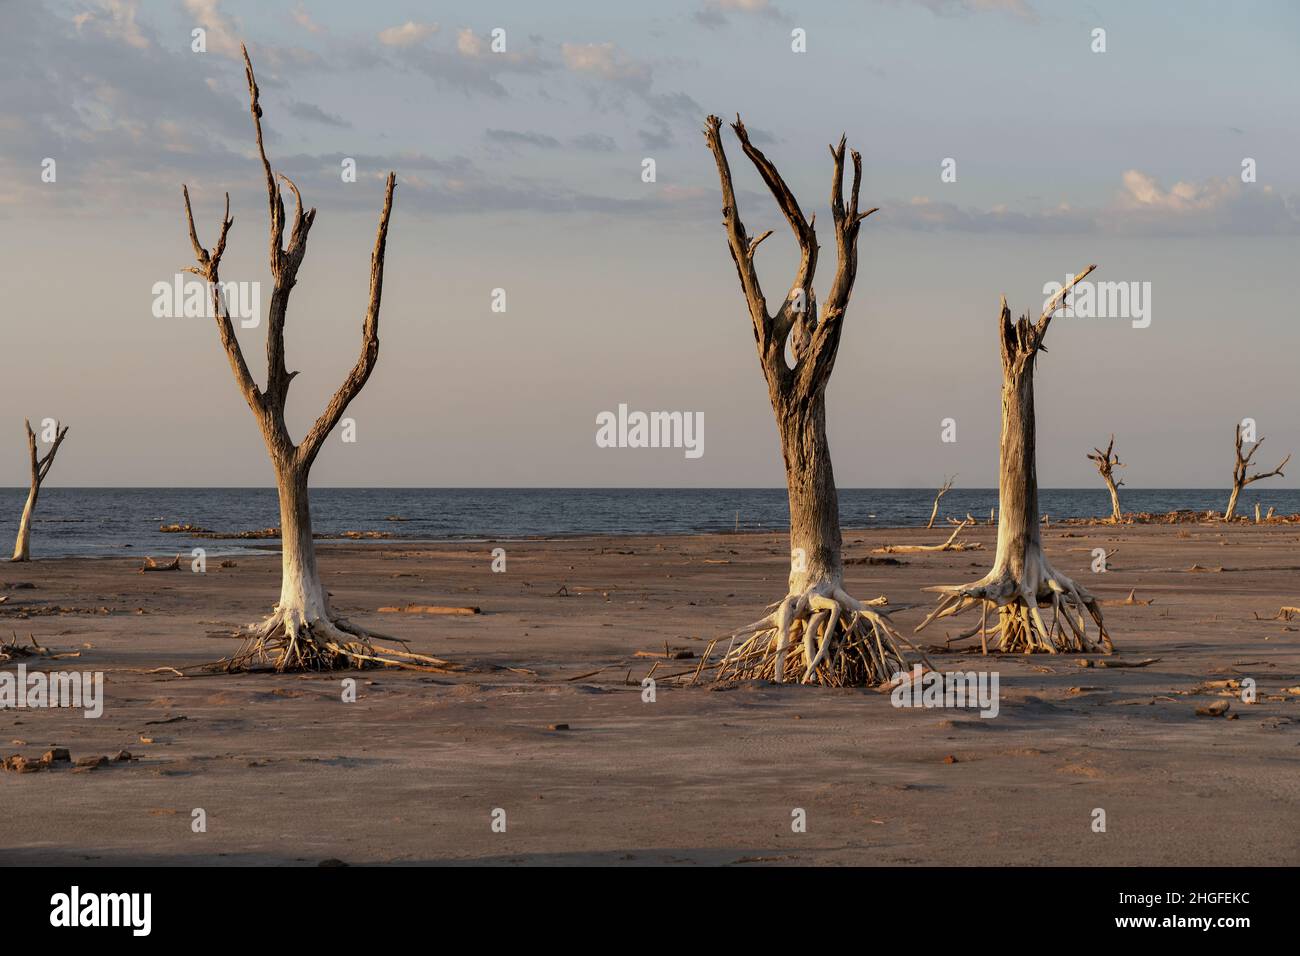 Drought-dead trees and cracked soil in dry lagoon. Climate change, global warming and water crisis. Stock Photo